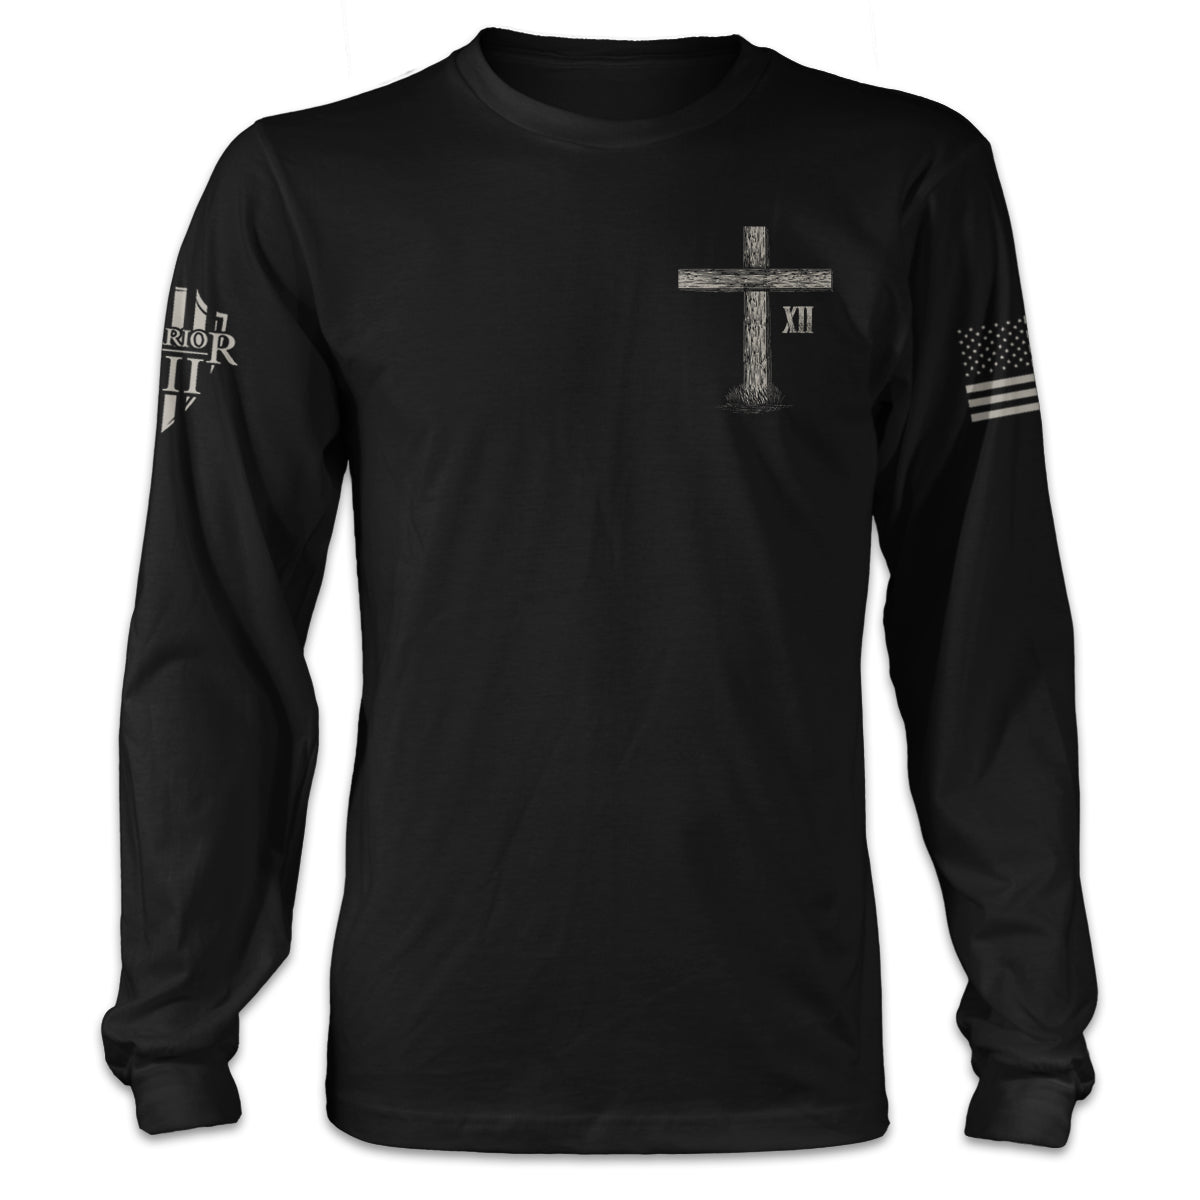 Remember Those Before Us Long Sleeve